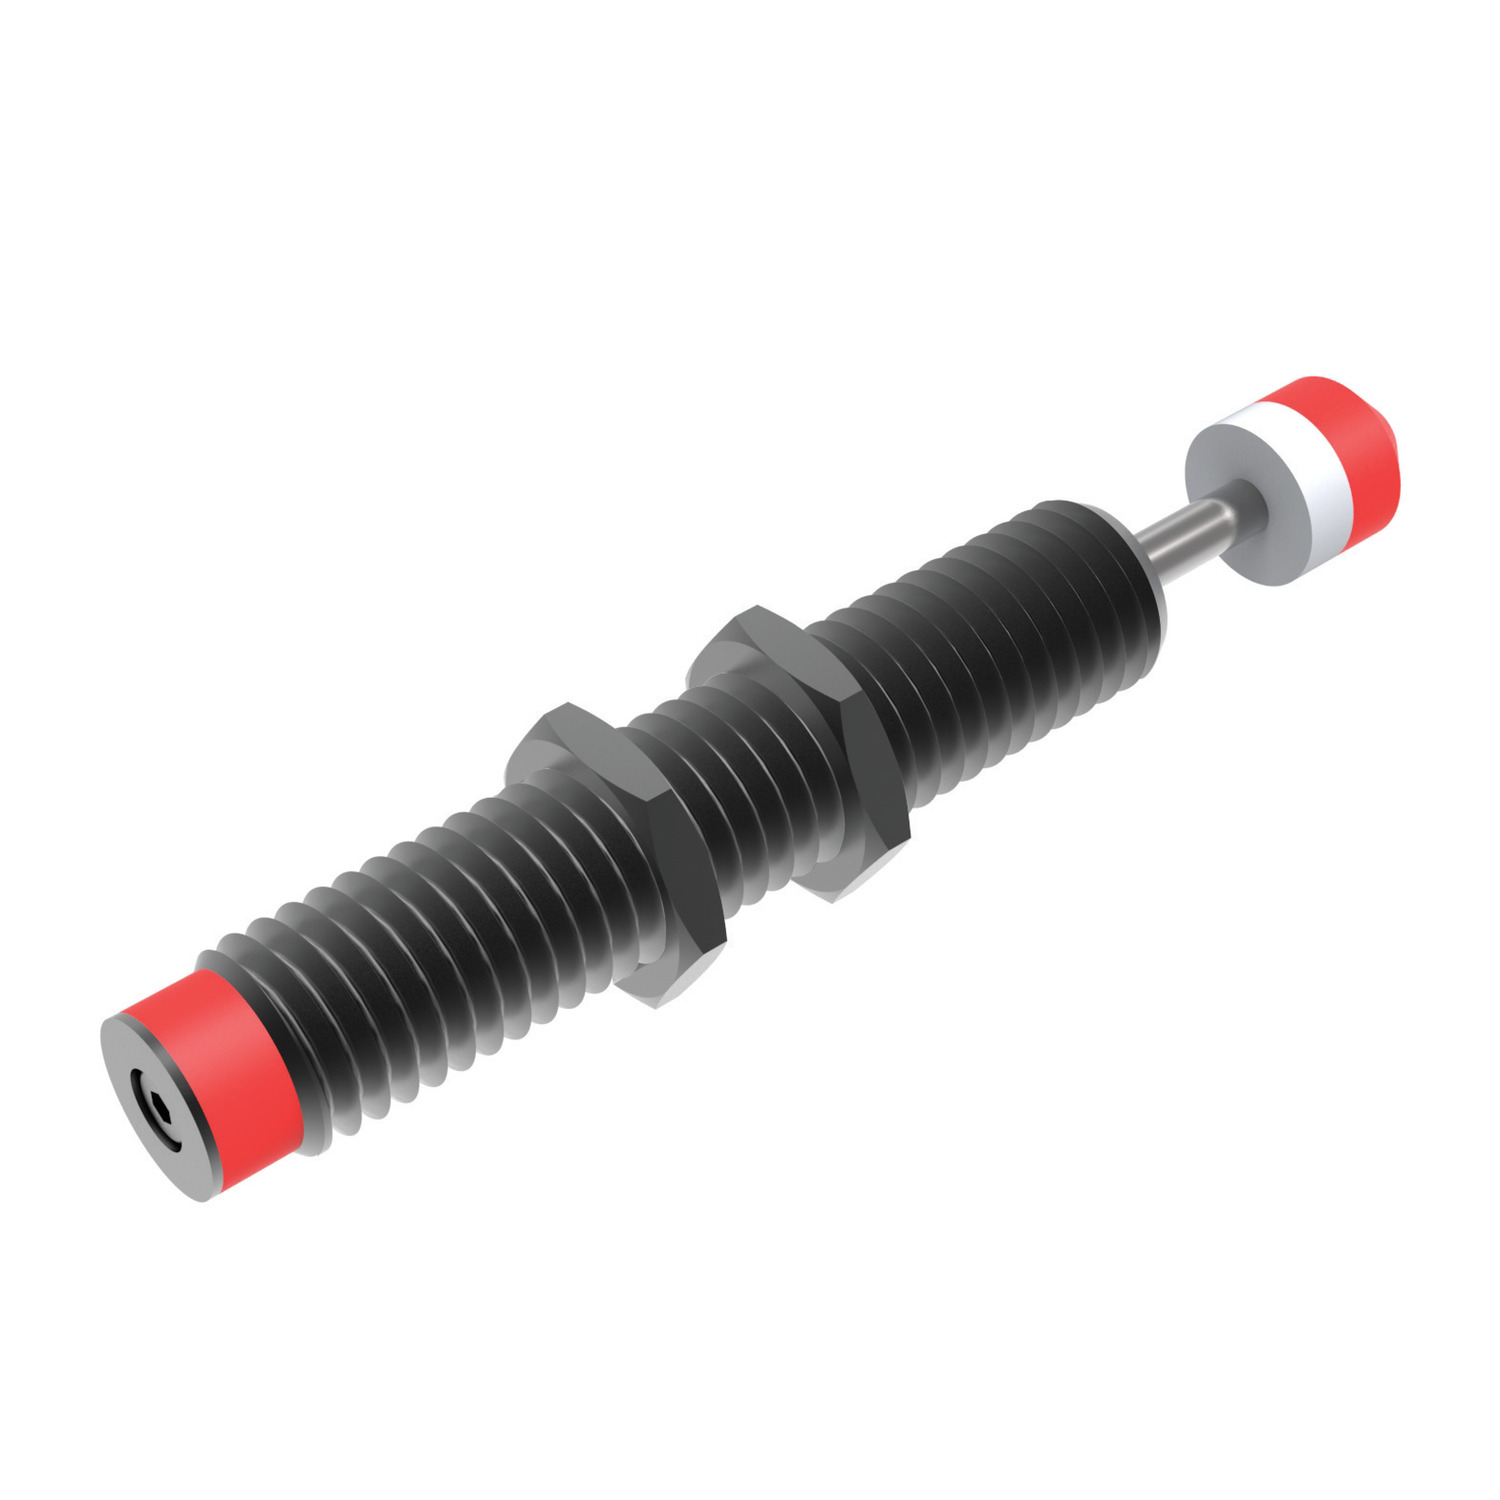 68002 Shock Absorbers, Self Compensating